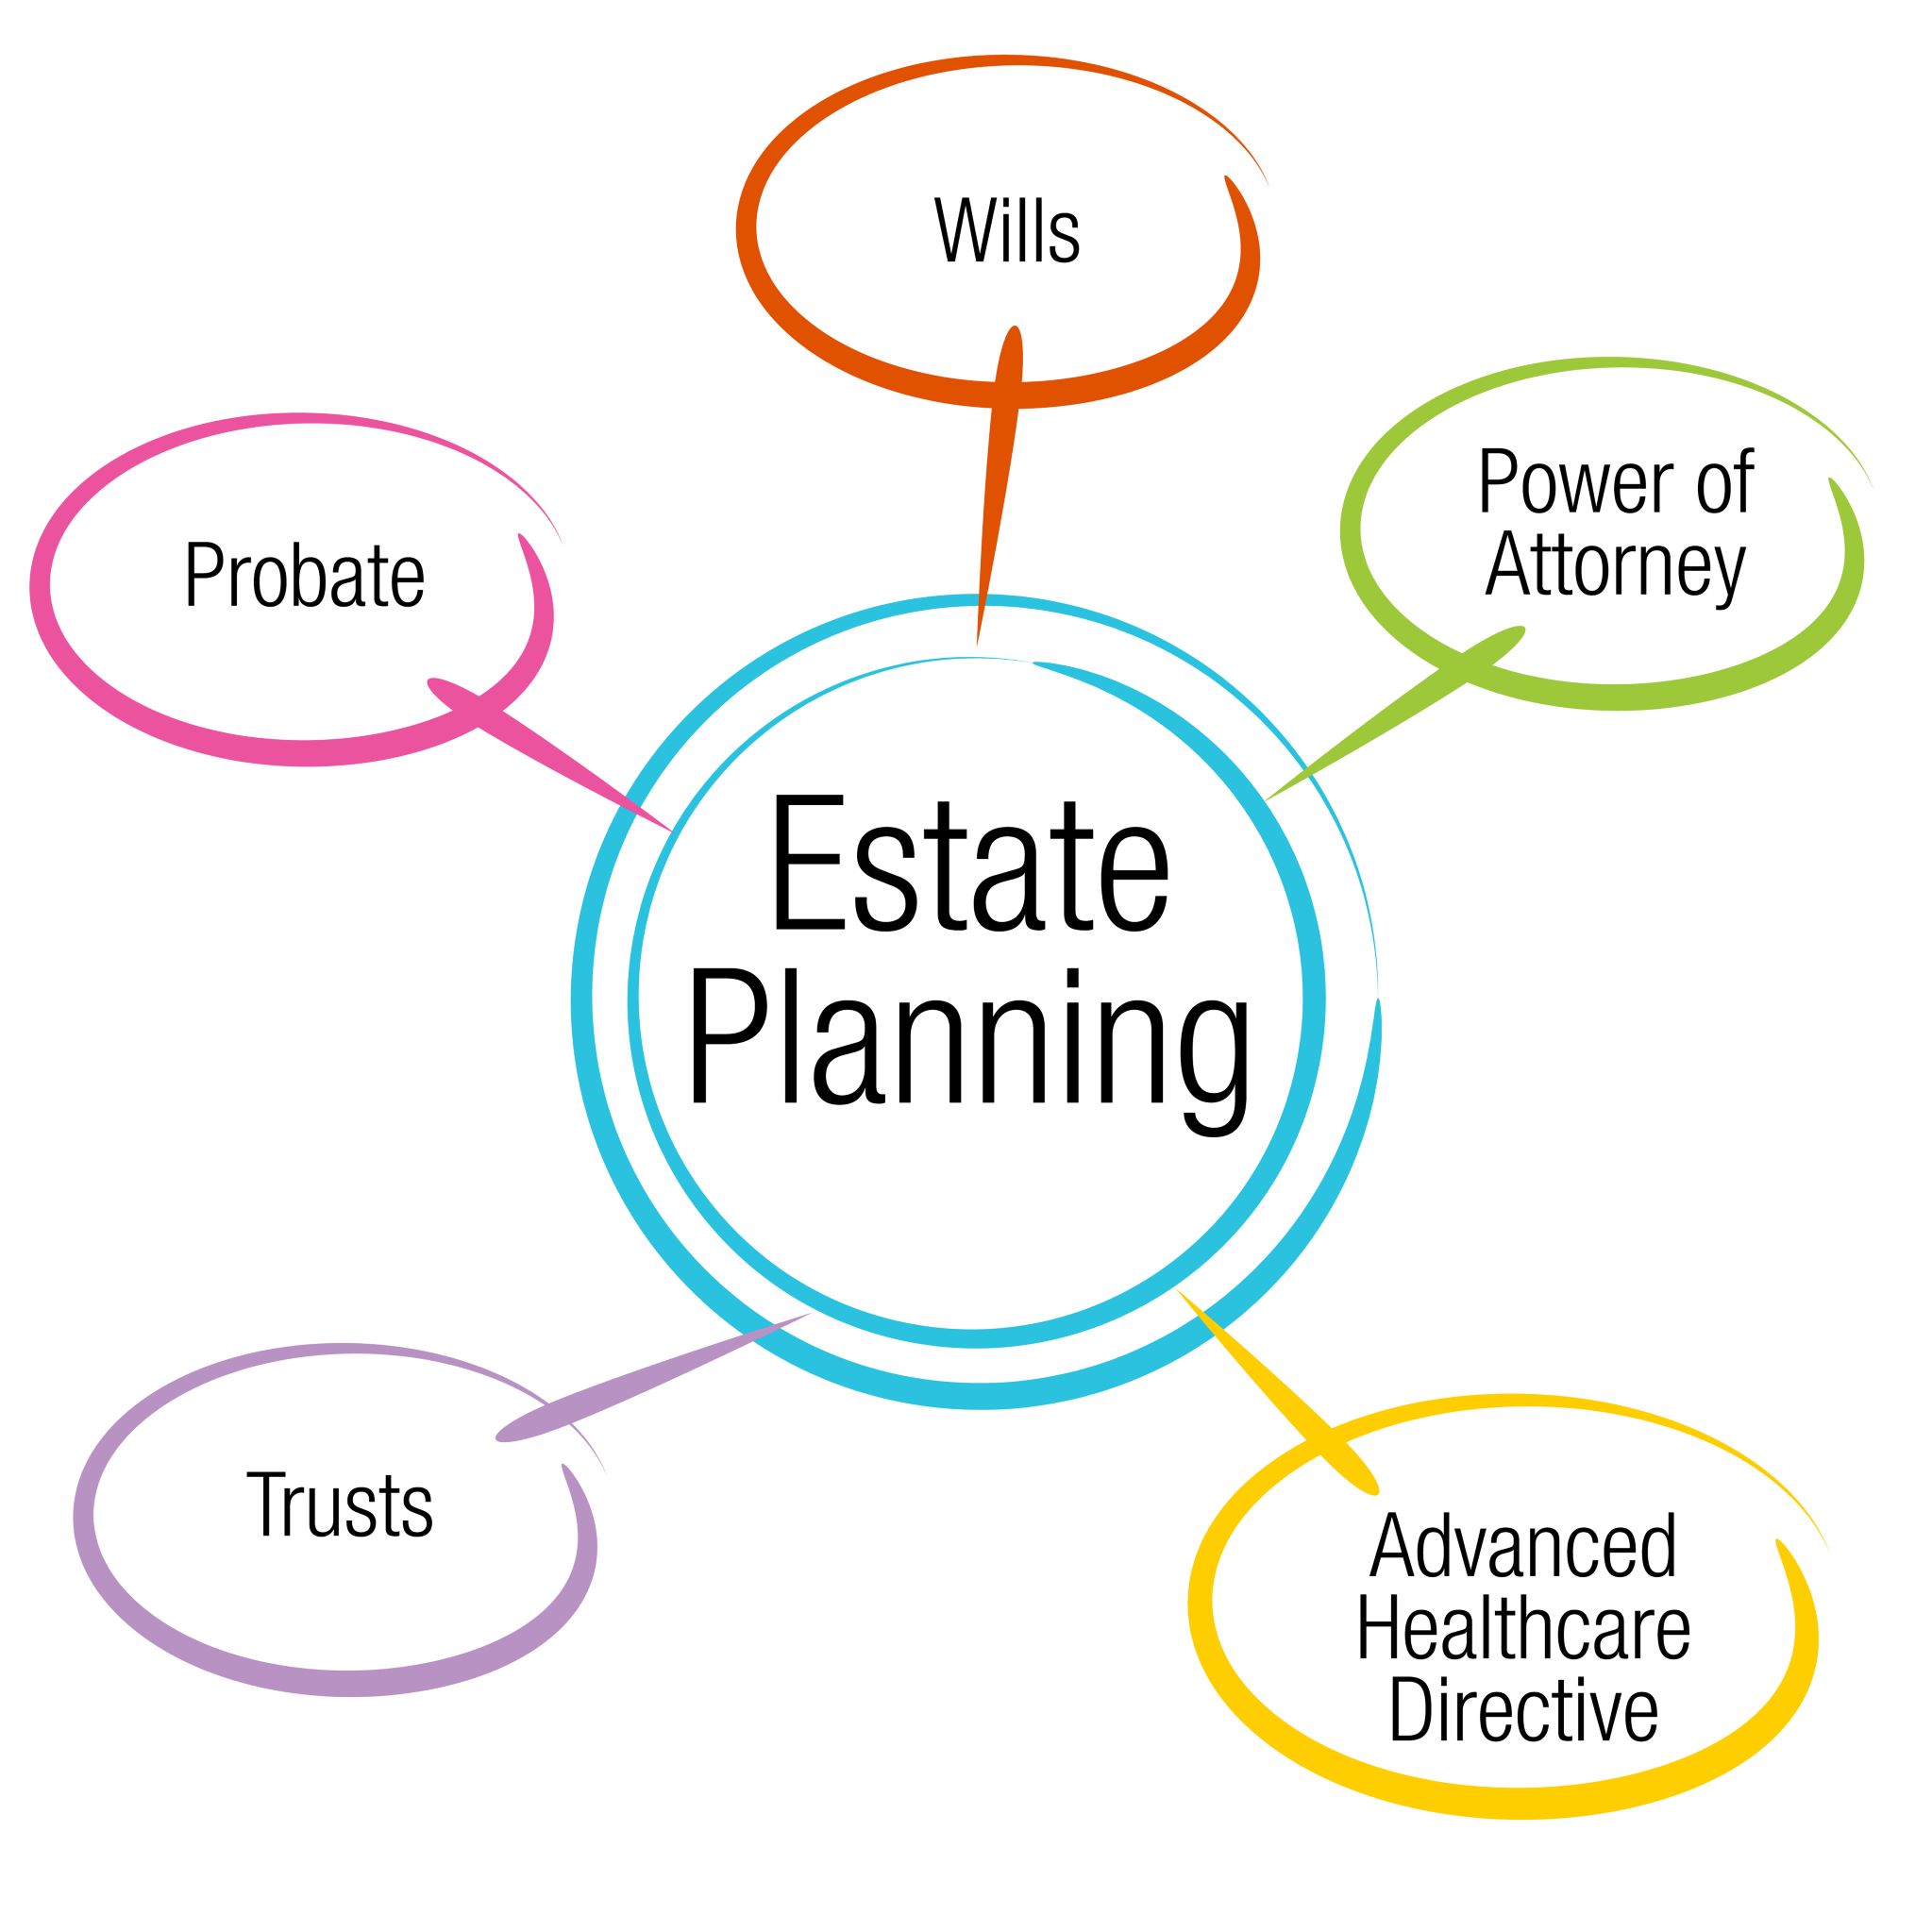 It’s Time to Celebrate National Estate Planning Week!